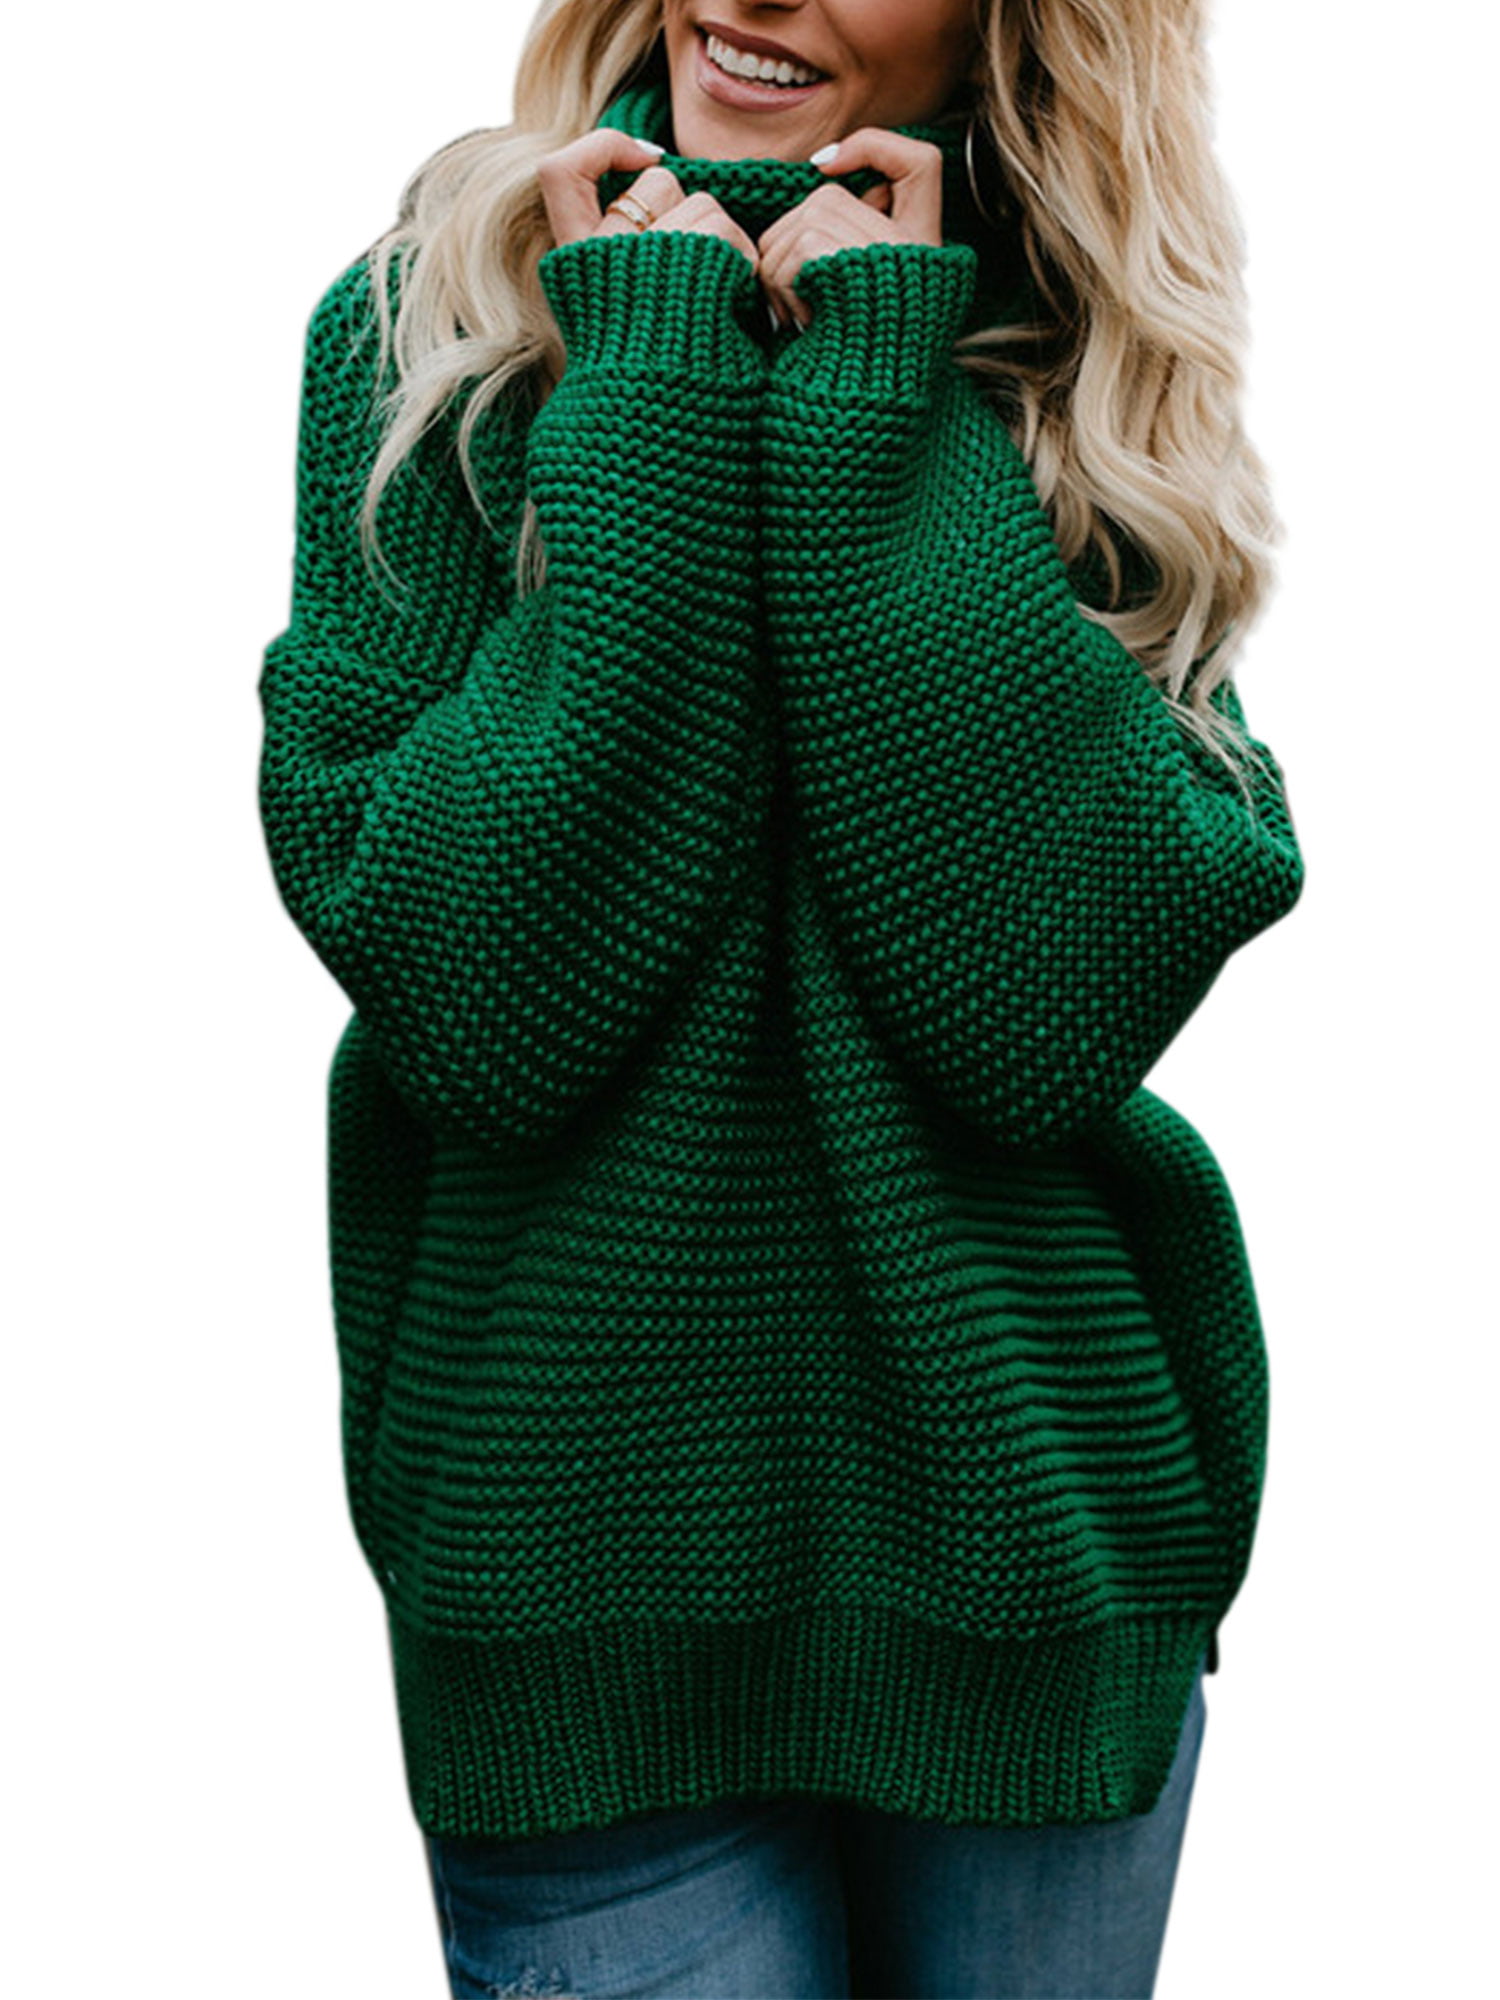 Sexy Dance - Women Winter Warm Knitted Sweater Polo Neck Tops Chunky ...